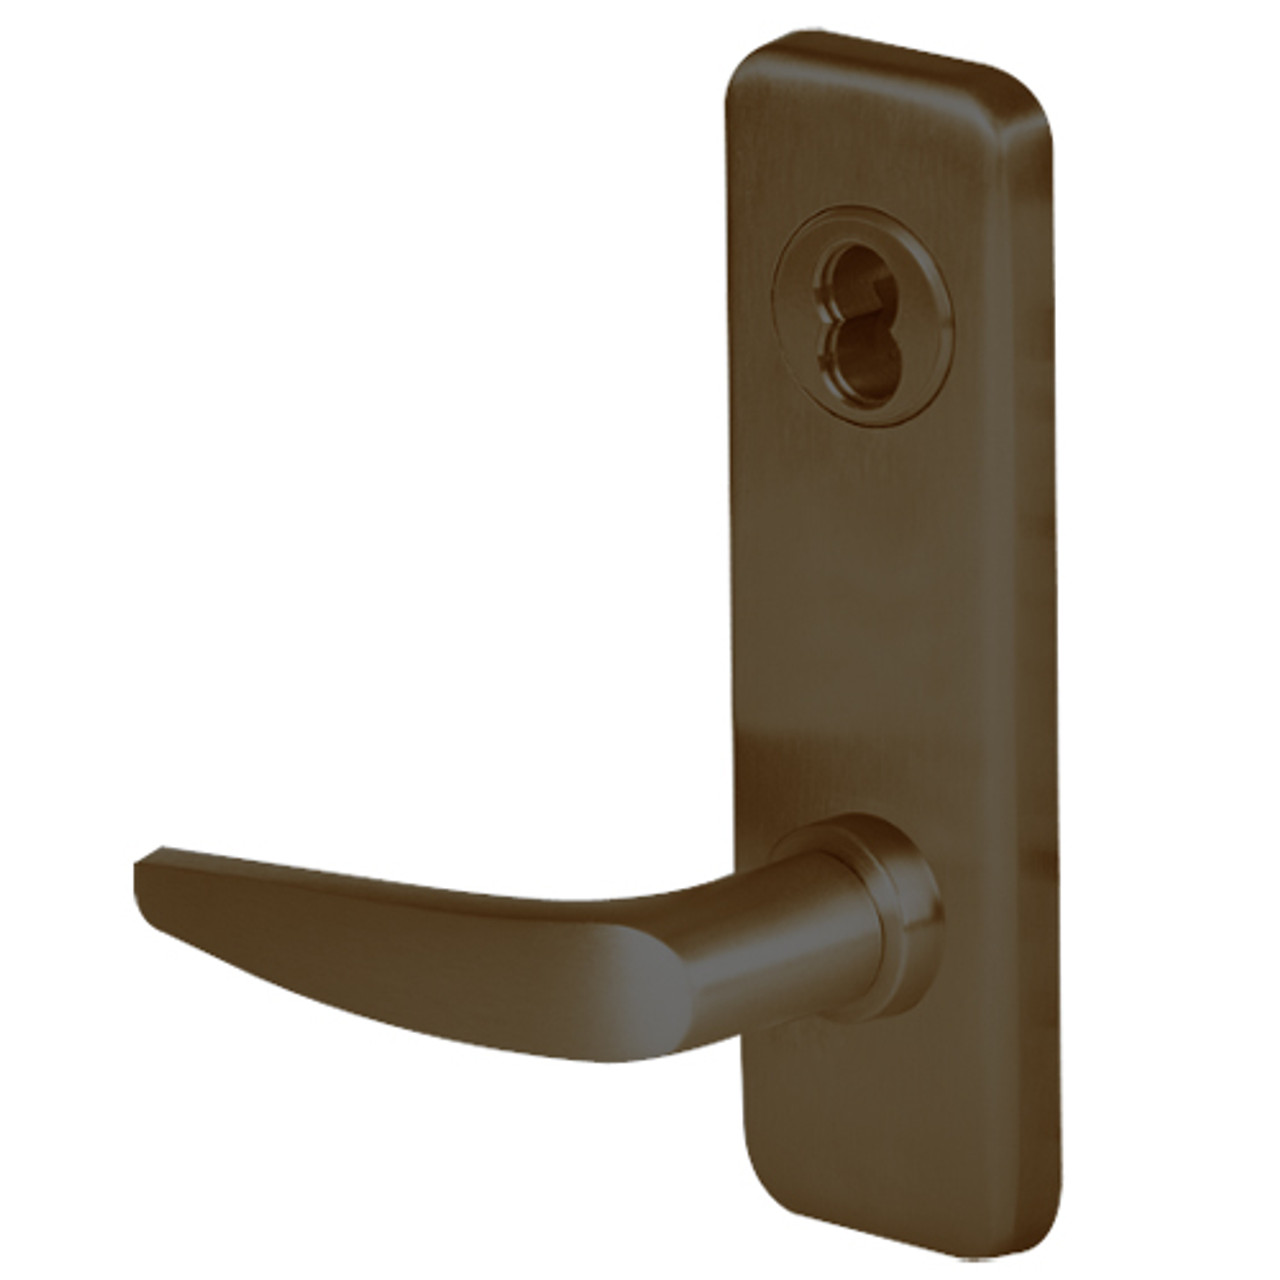 45HW7TWEL16J613 Best 40HW series Double Key Deadbolt Fail Safe Electromechanical Mortise Lever Lock with Curved w/ No Return Style in Oil Rubbed Bronze